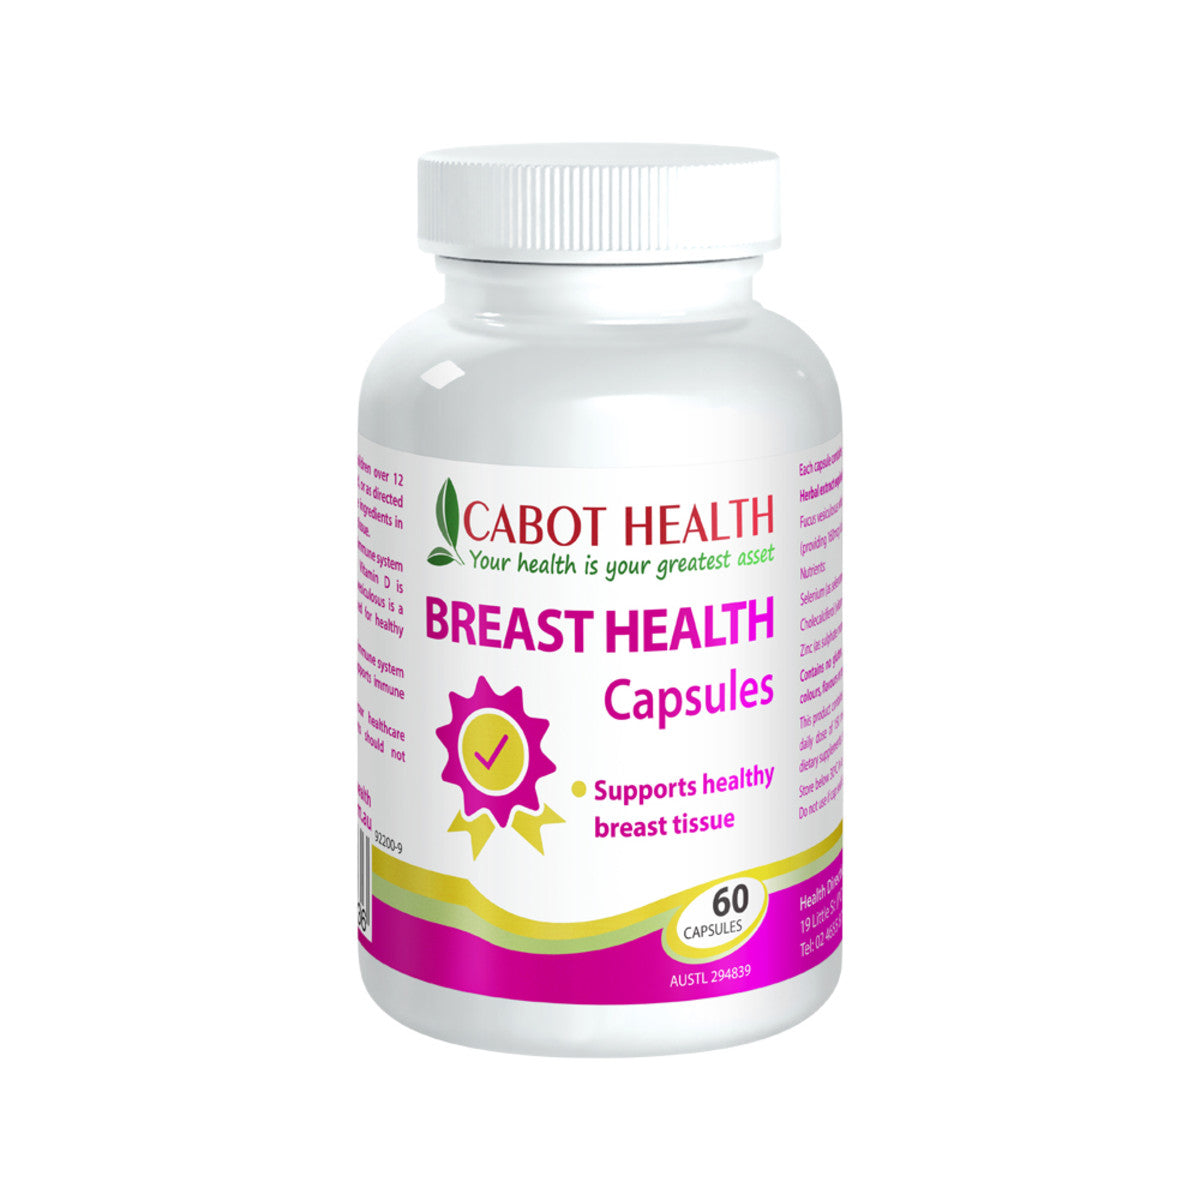 Cabot Health - Breast Health Capsules